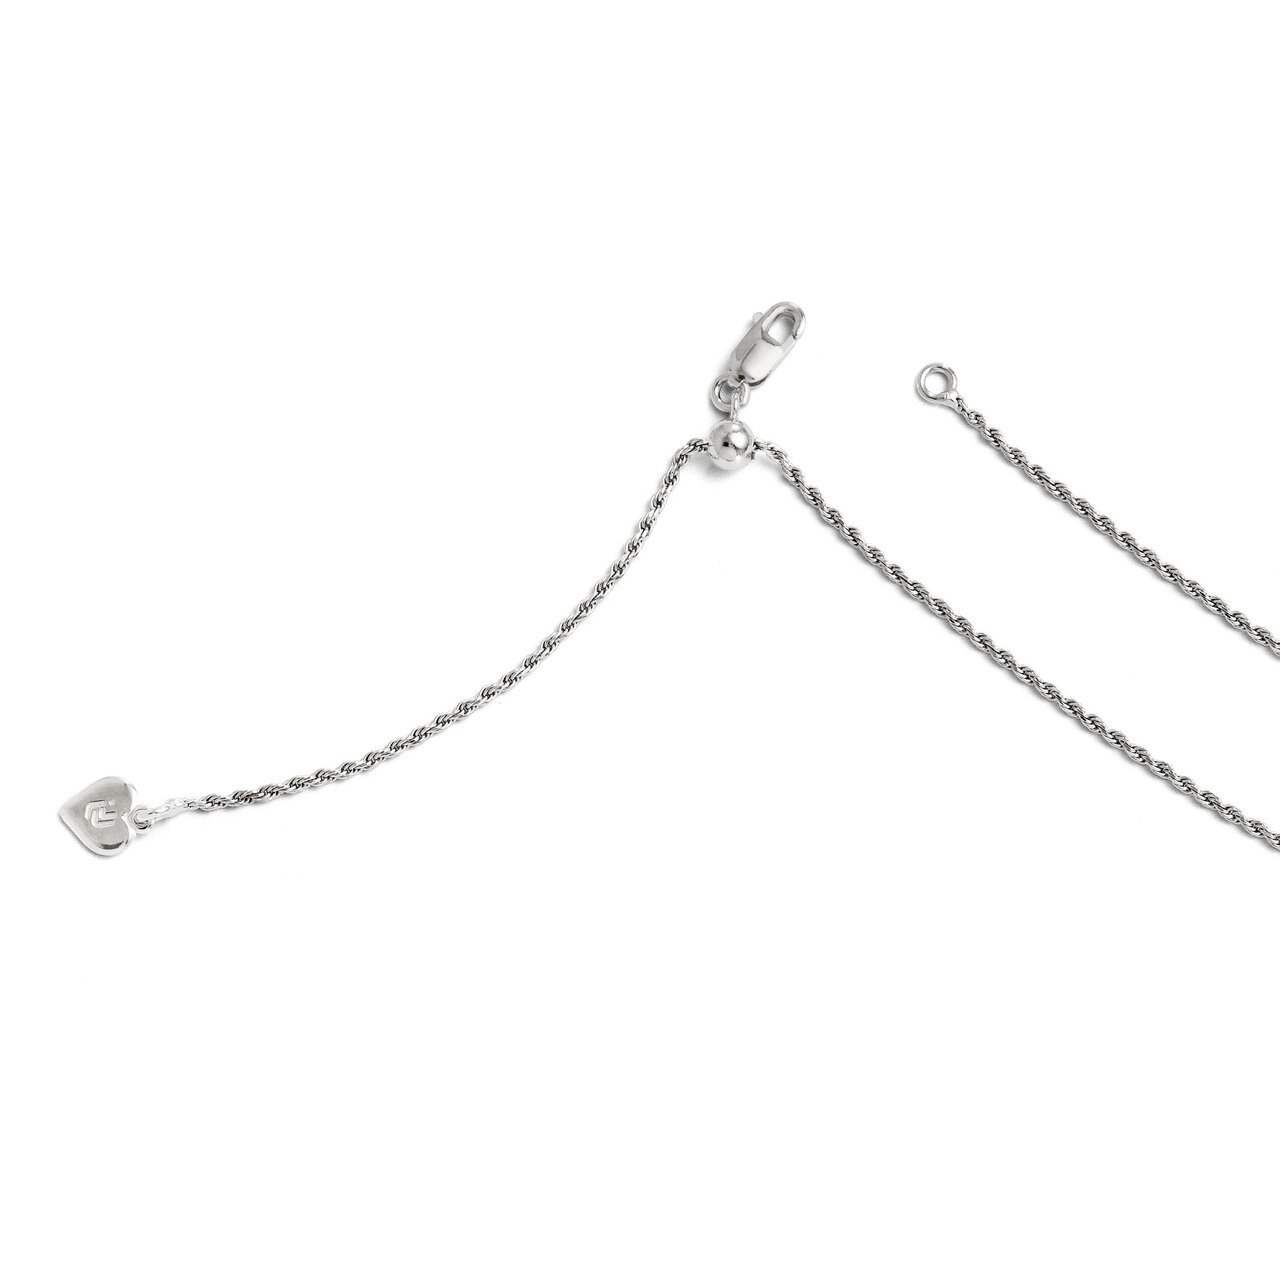 Adjustable Rope Chain 30 Inch - Sterling Silver HB-FC17-30